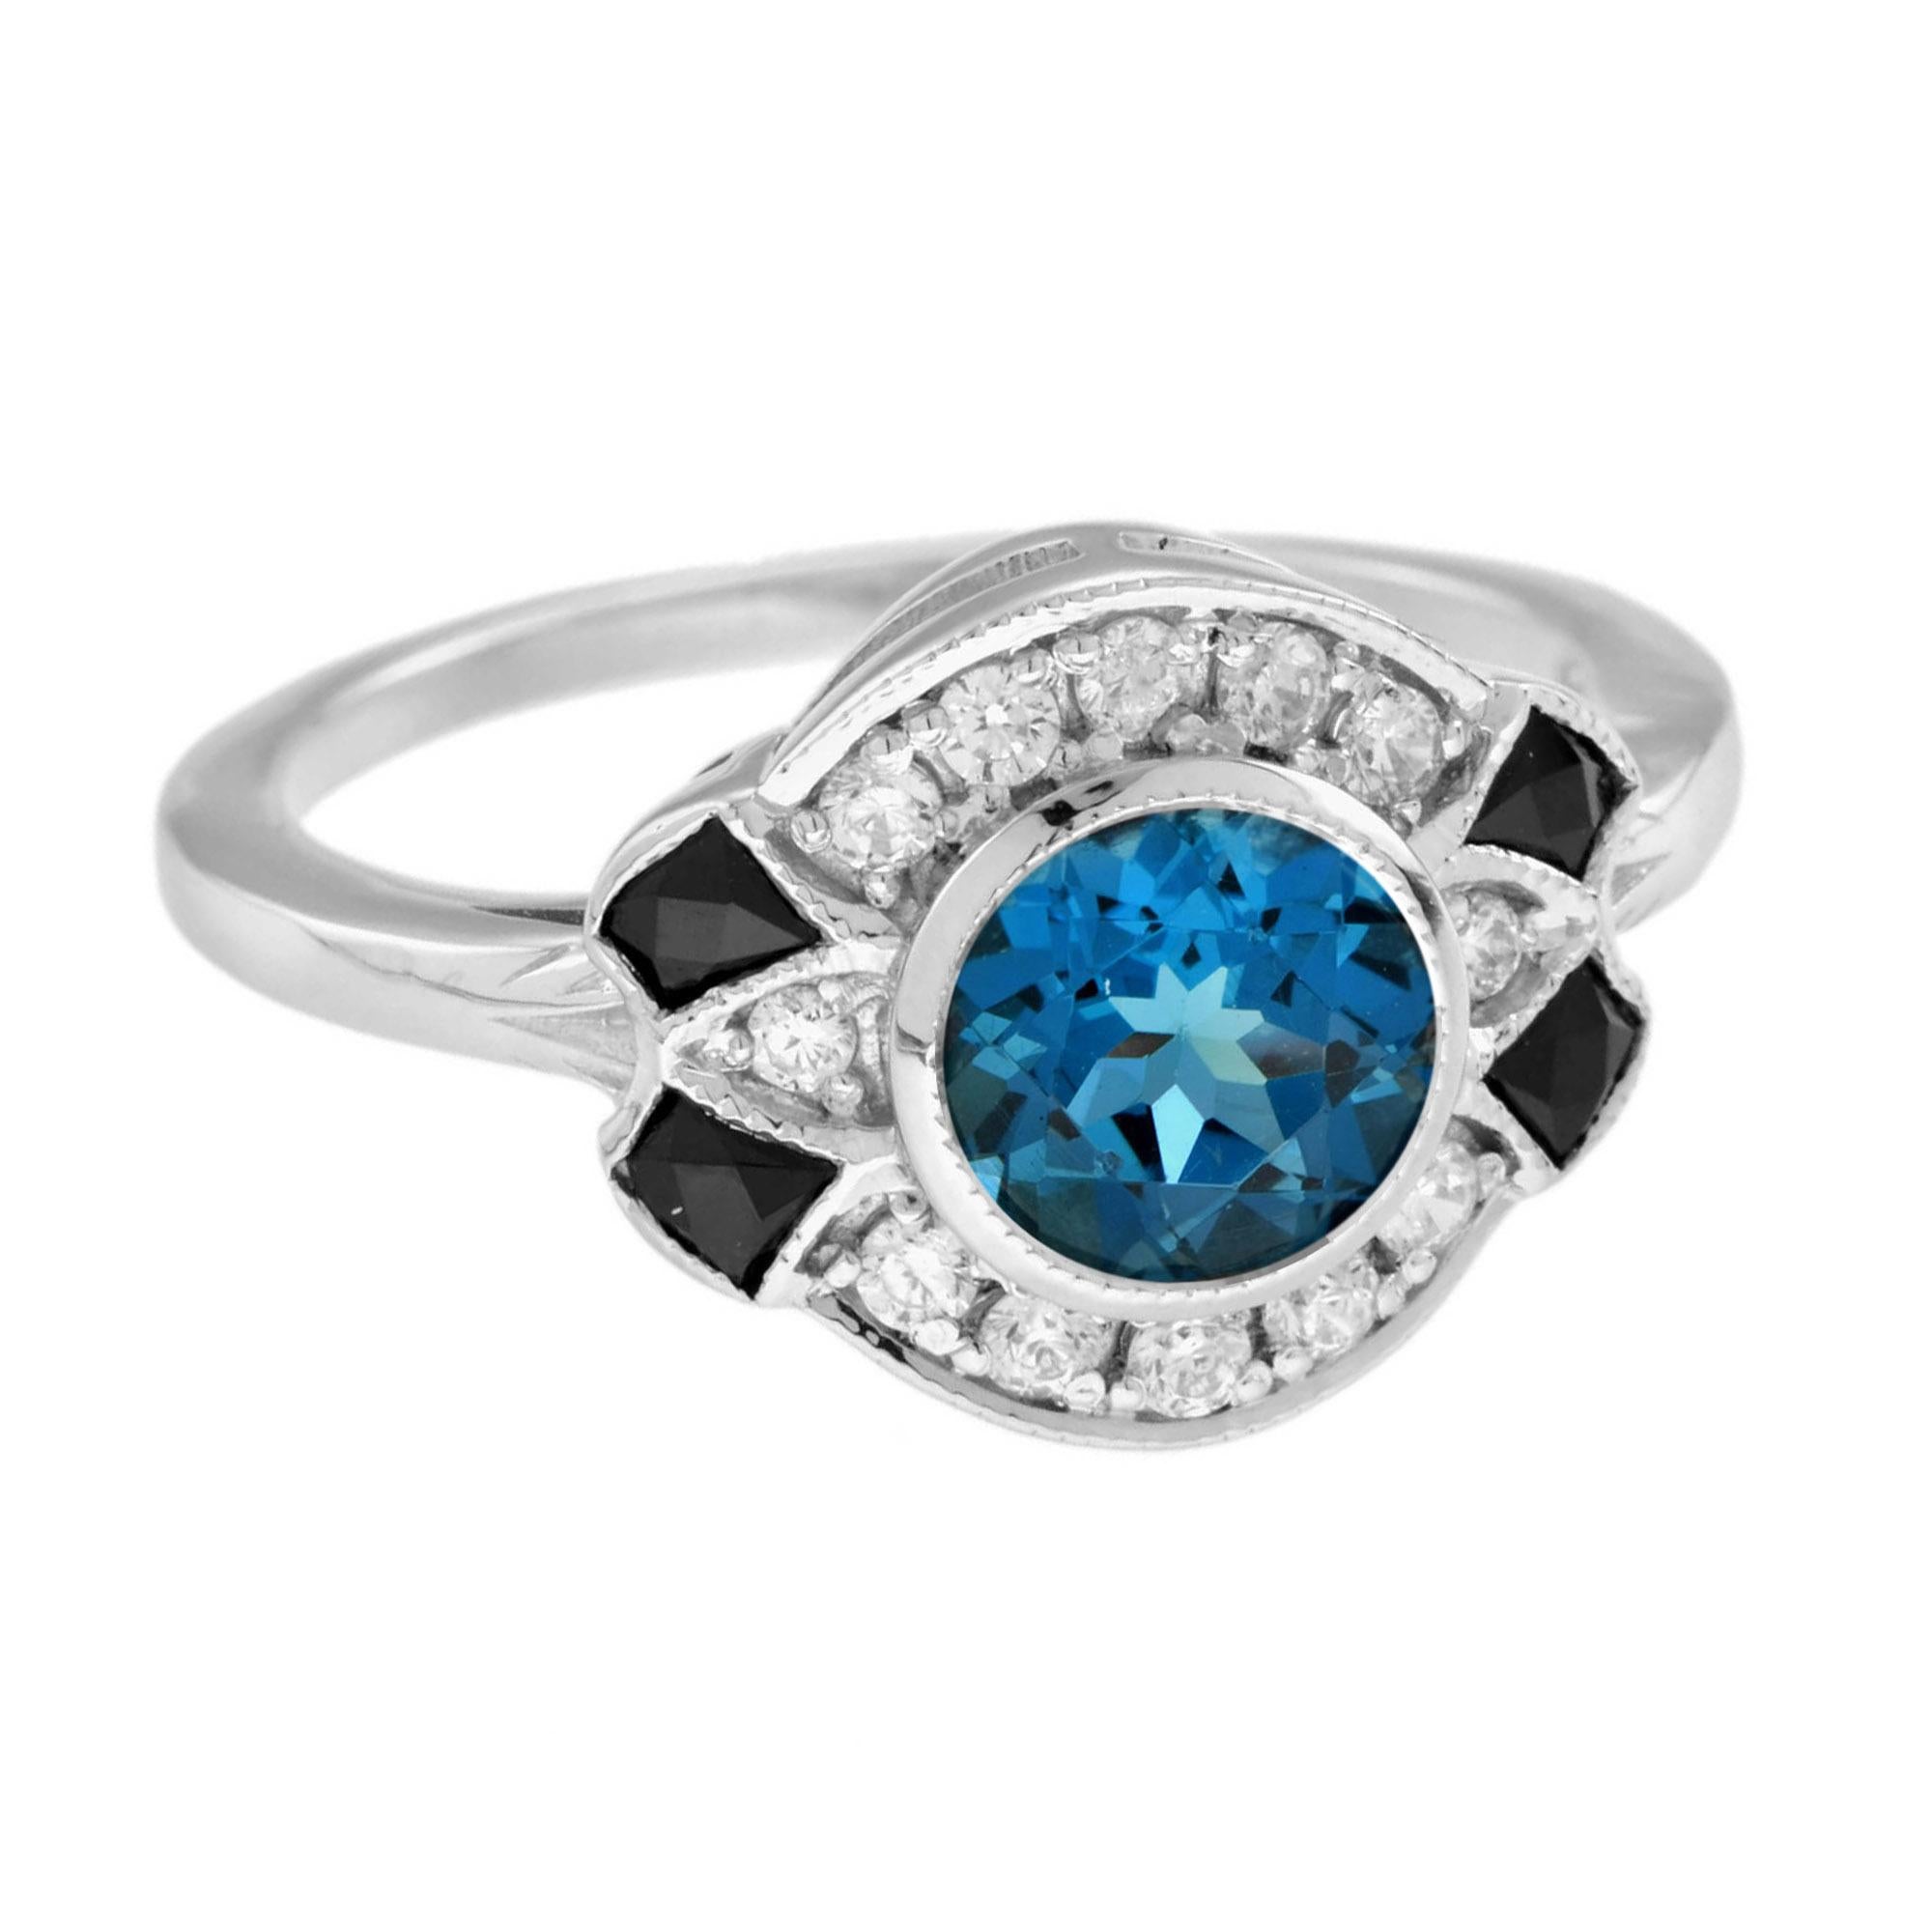 Round Cut London Blue Topaz Diamond Onyx Art Deco Style Ring in 14K White Gold For Sale